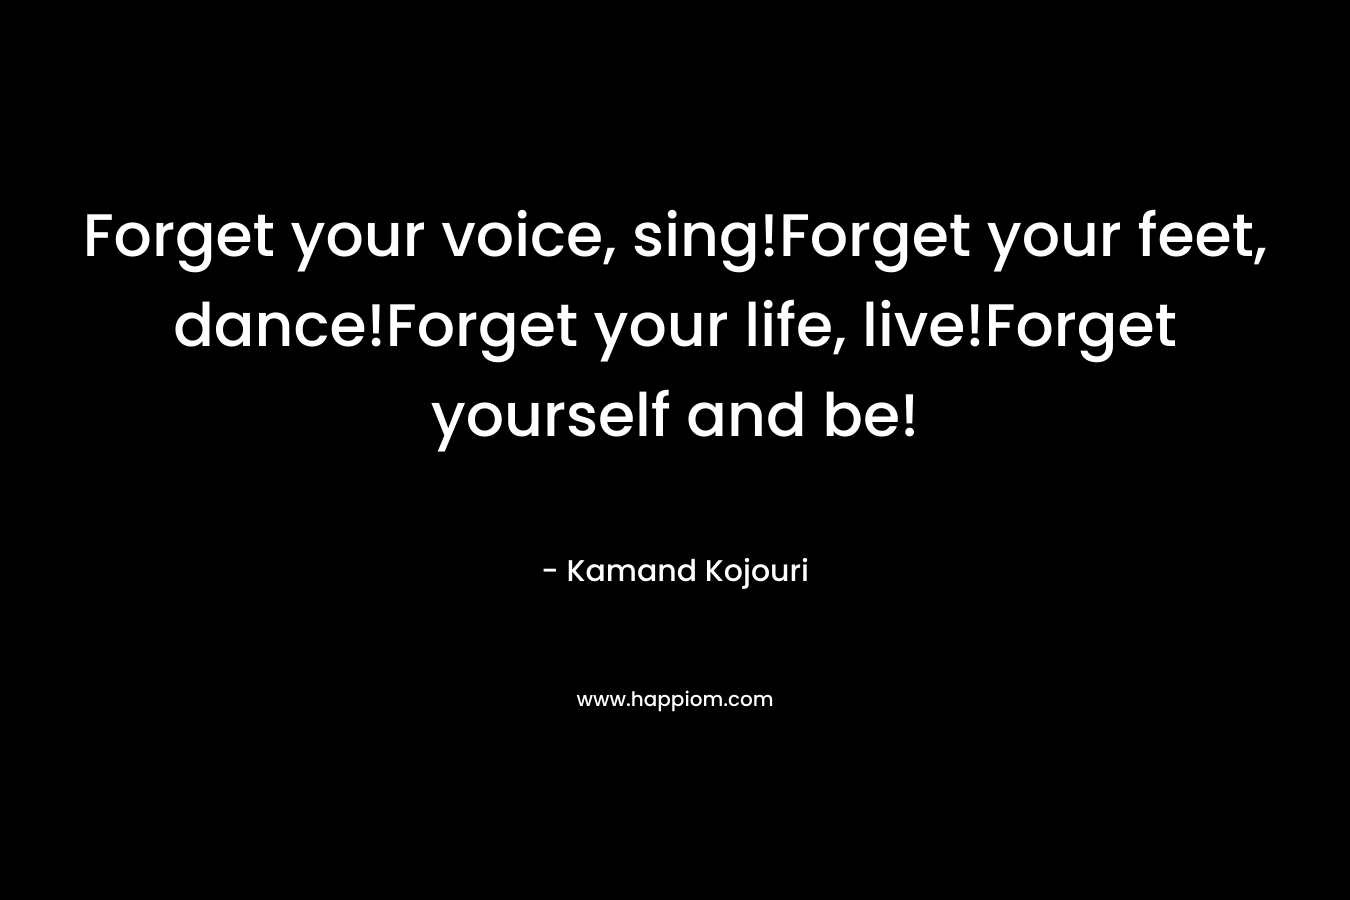 Forget your voice, sing!Forget your feet, dance!Forget your life, live!Forget yourself and be!